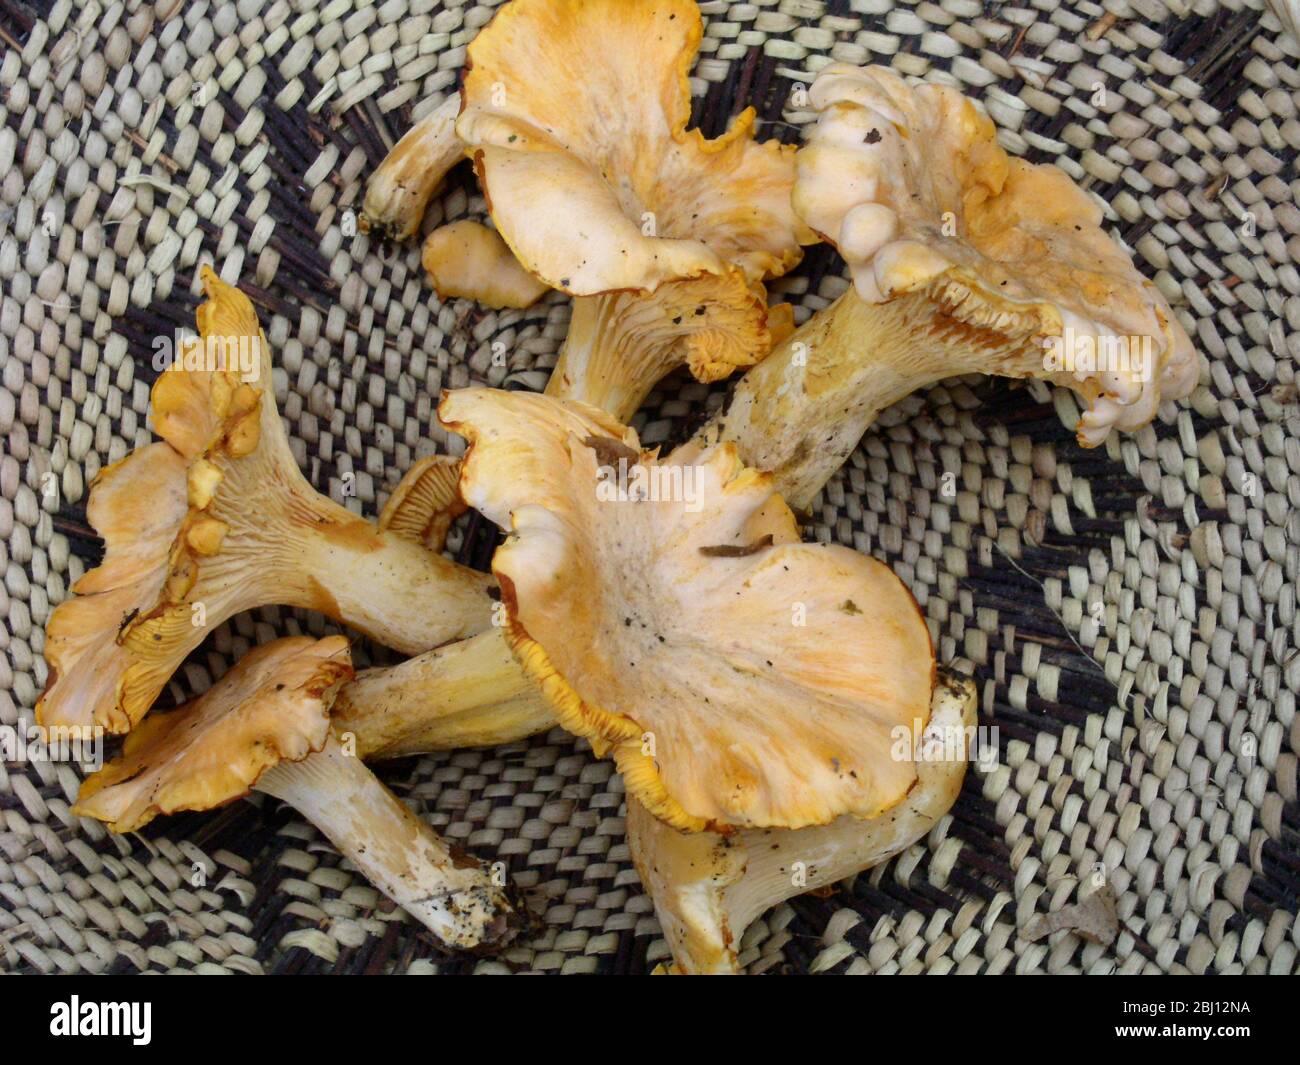 Chanterelle mushrooms gathered in Kent displayed in hand woven African basket - Stock Photo